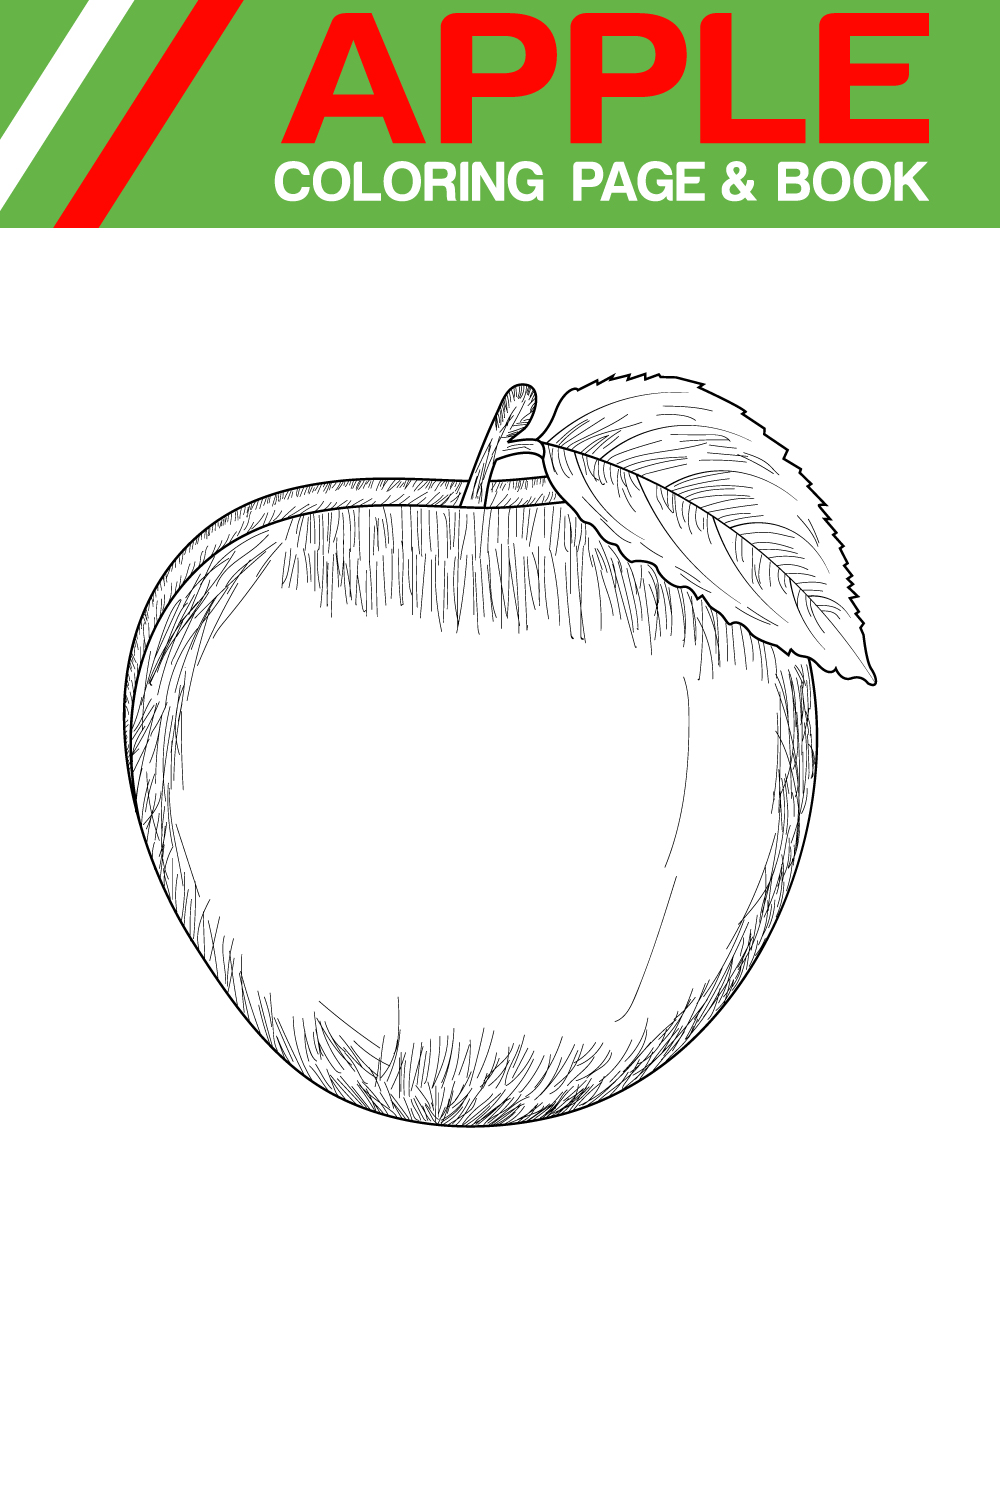 apple fruits Line art coloring page for adults pinterest preview image.